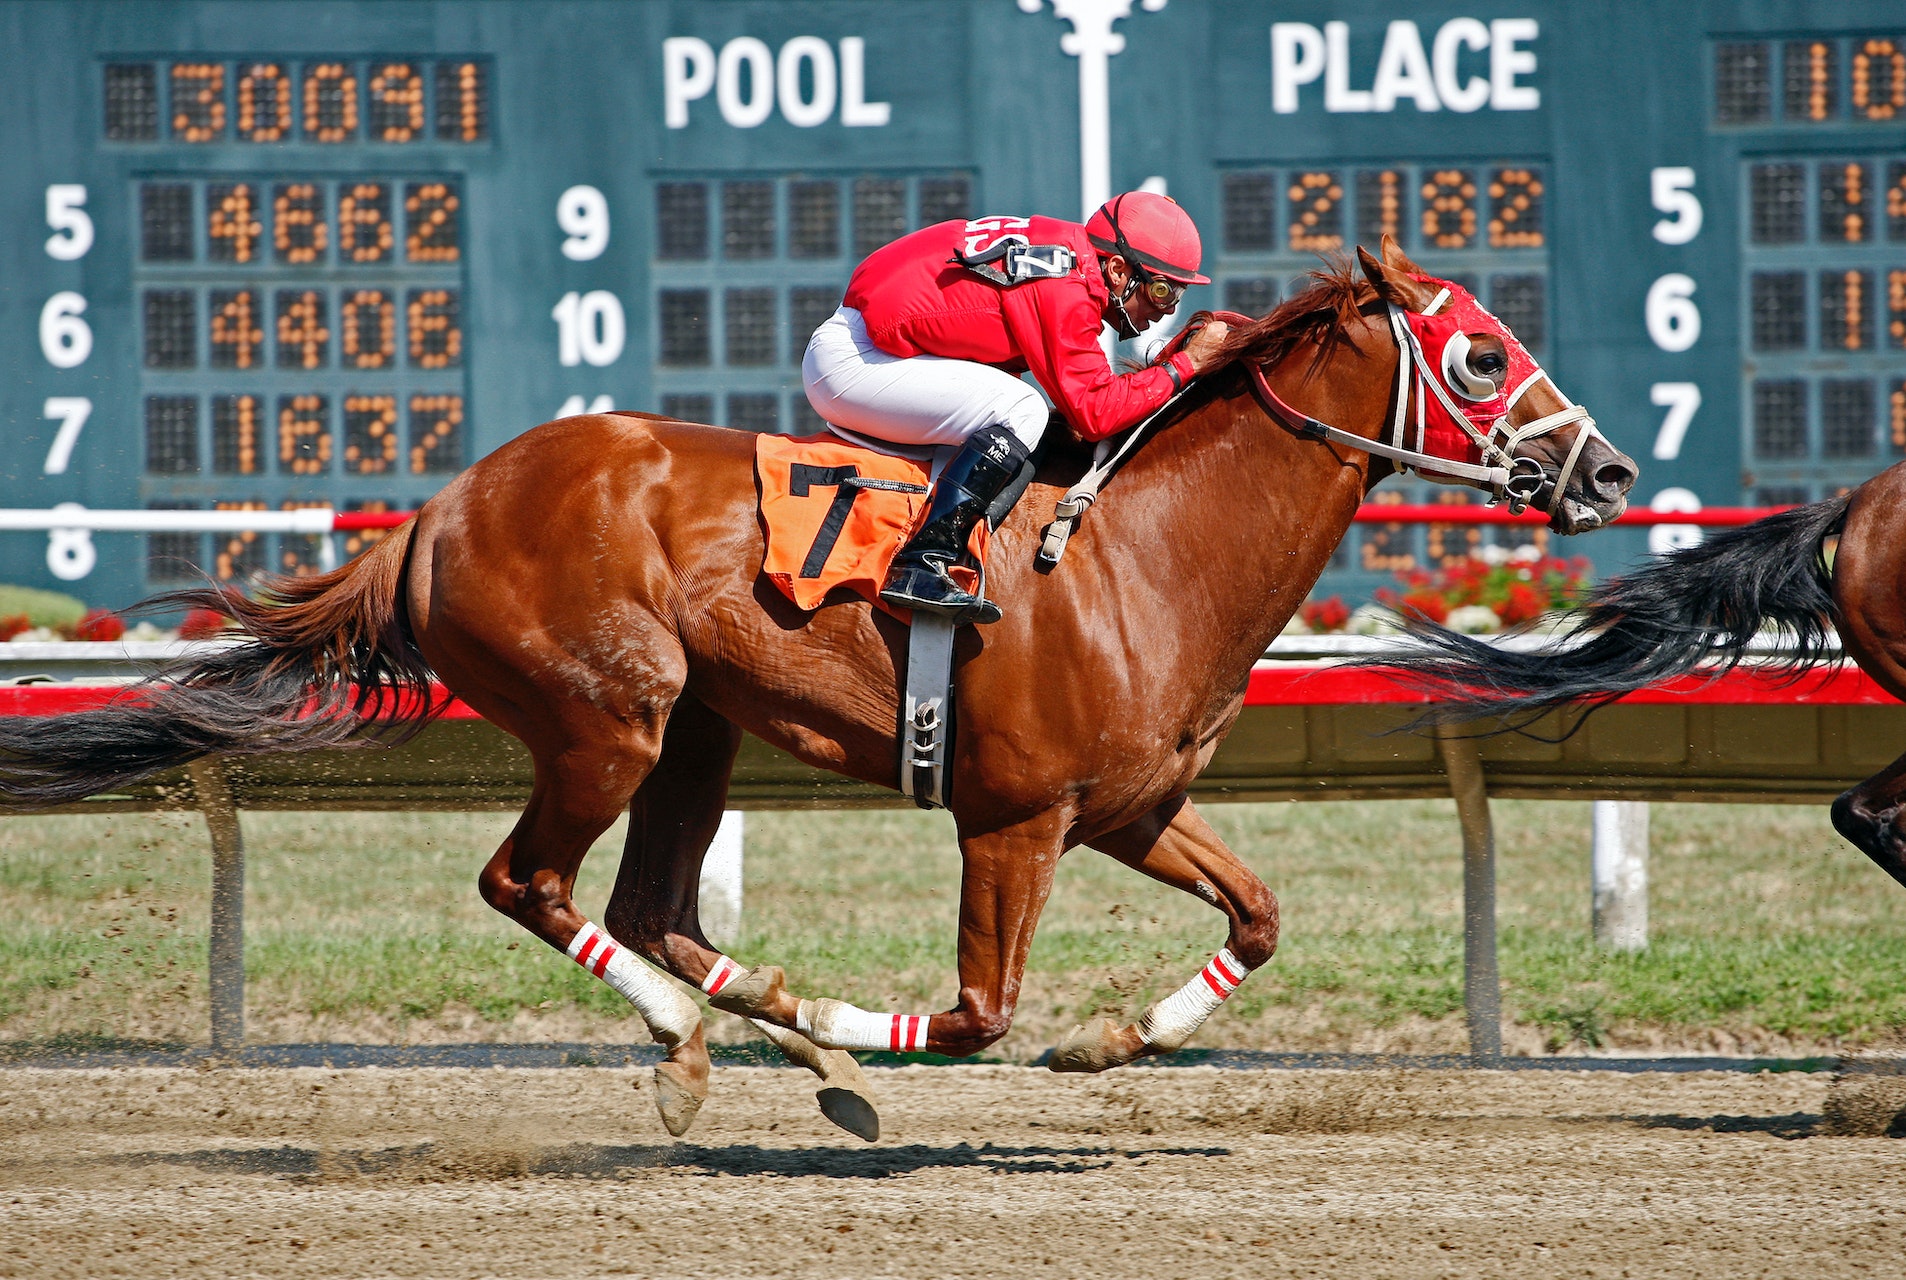 Box Horse Racing - Tips For Maximizing Your Betting Experience